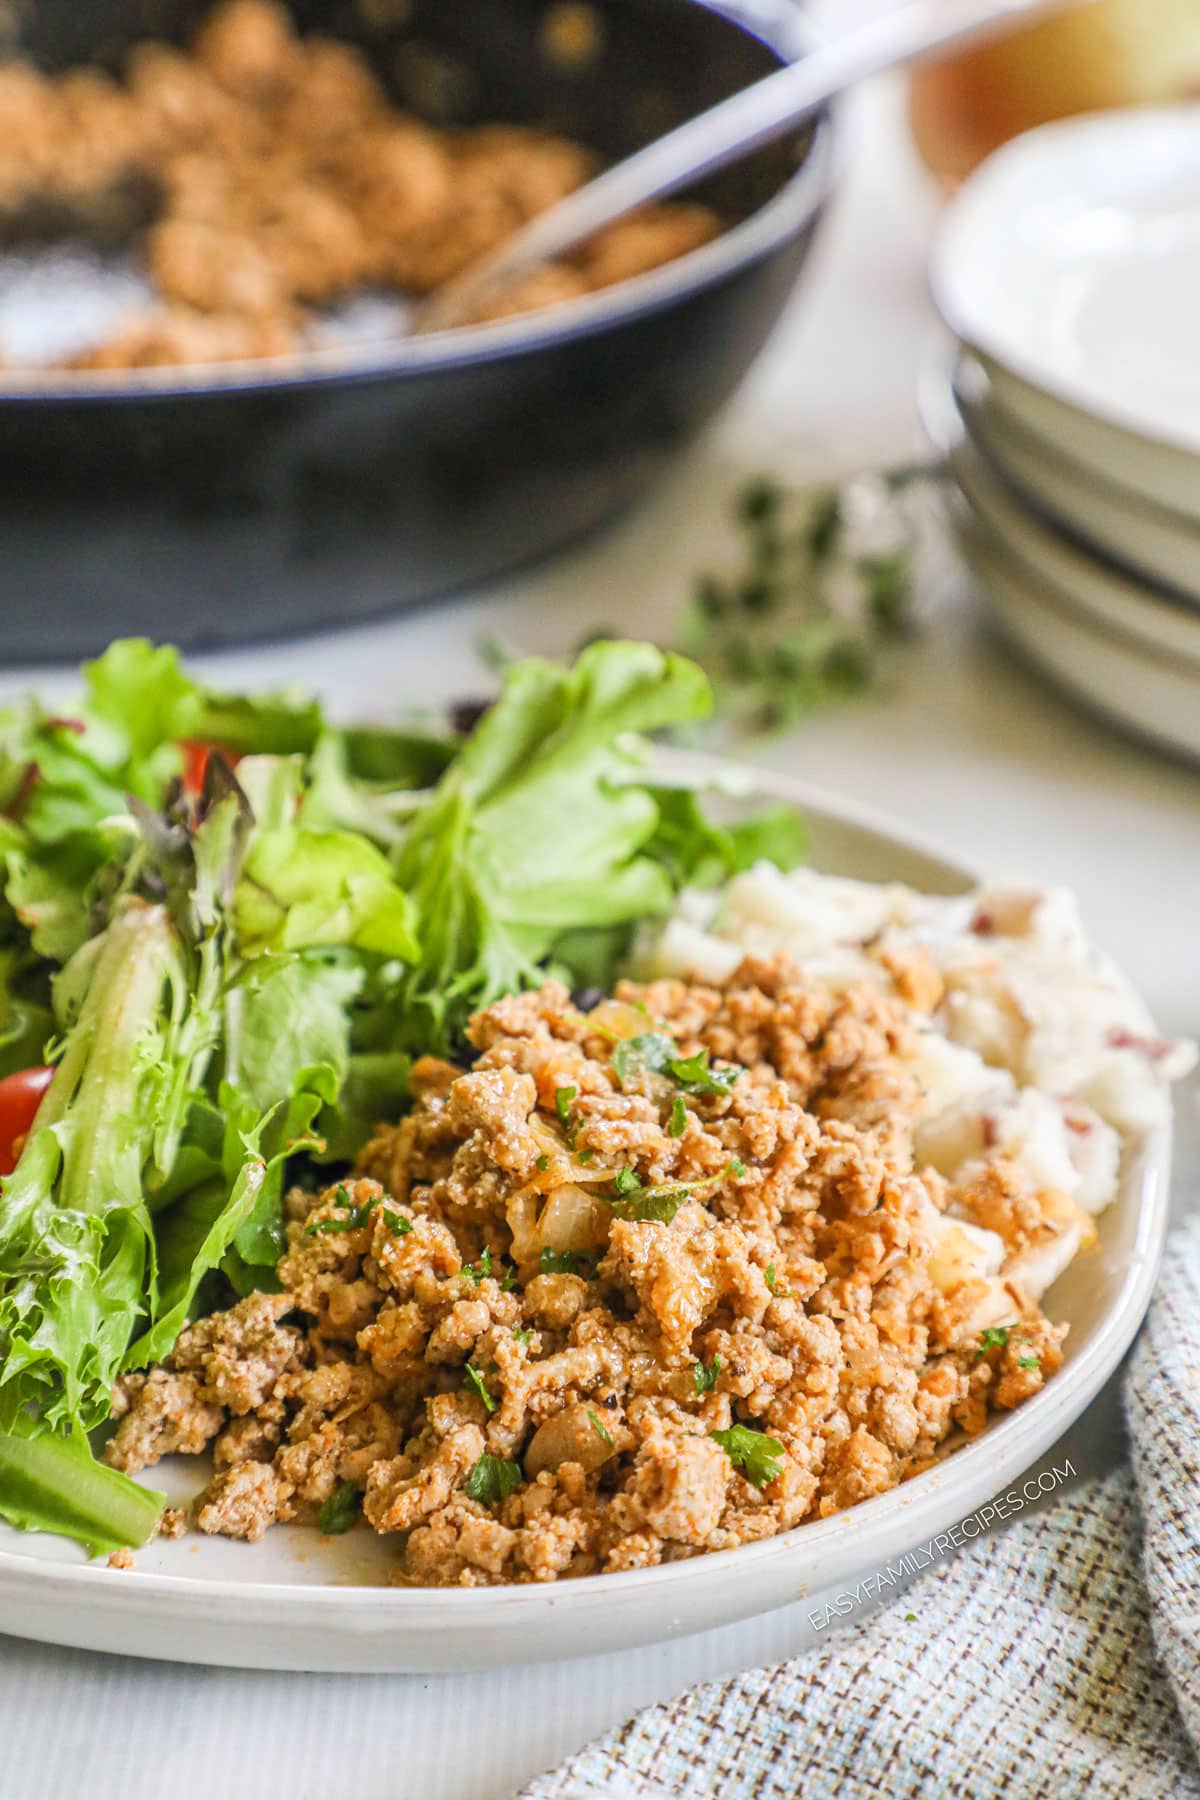 a plate piled with seasoned ground turkey and a salad.